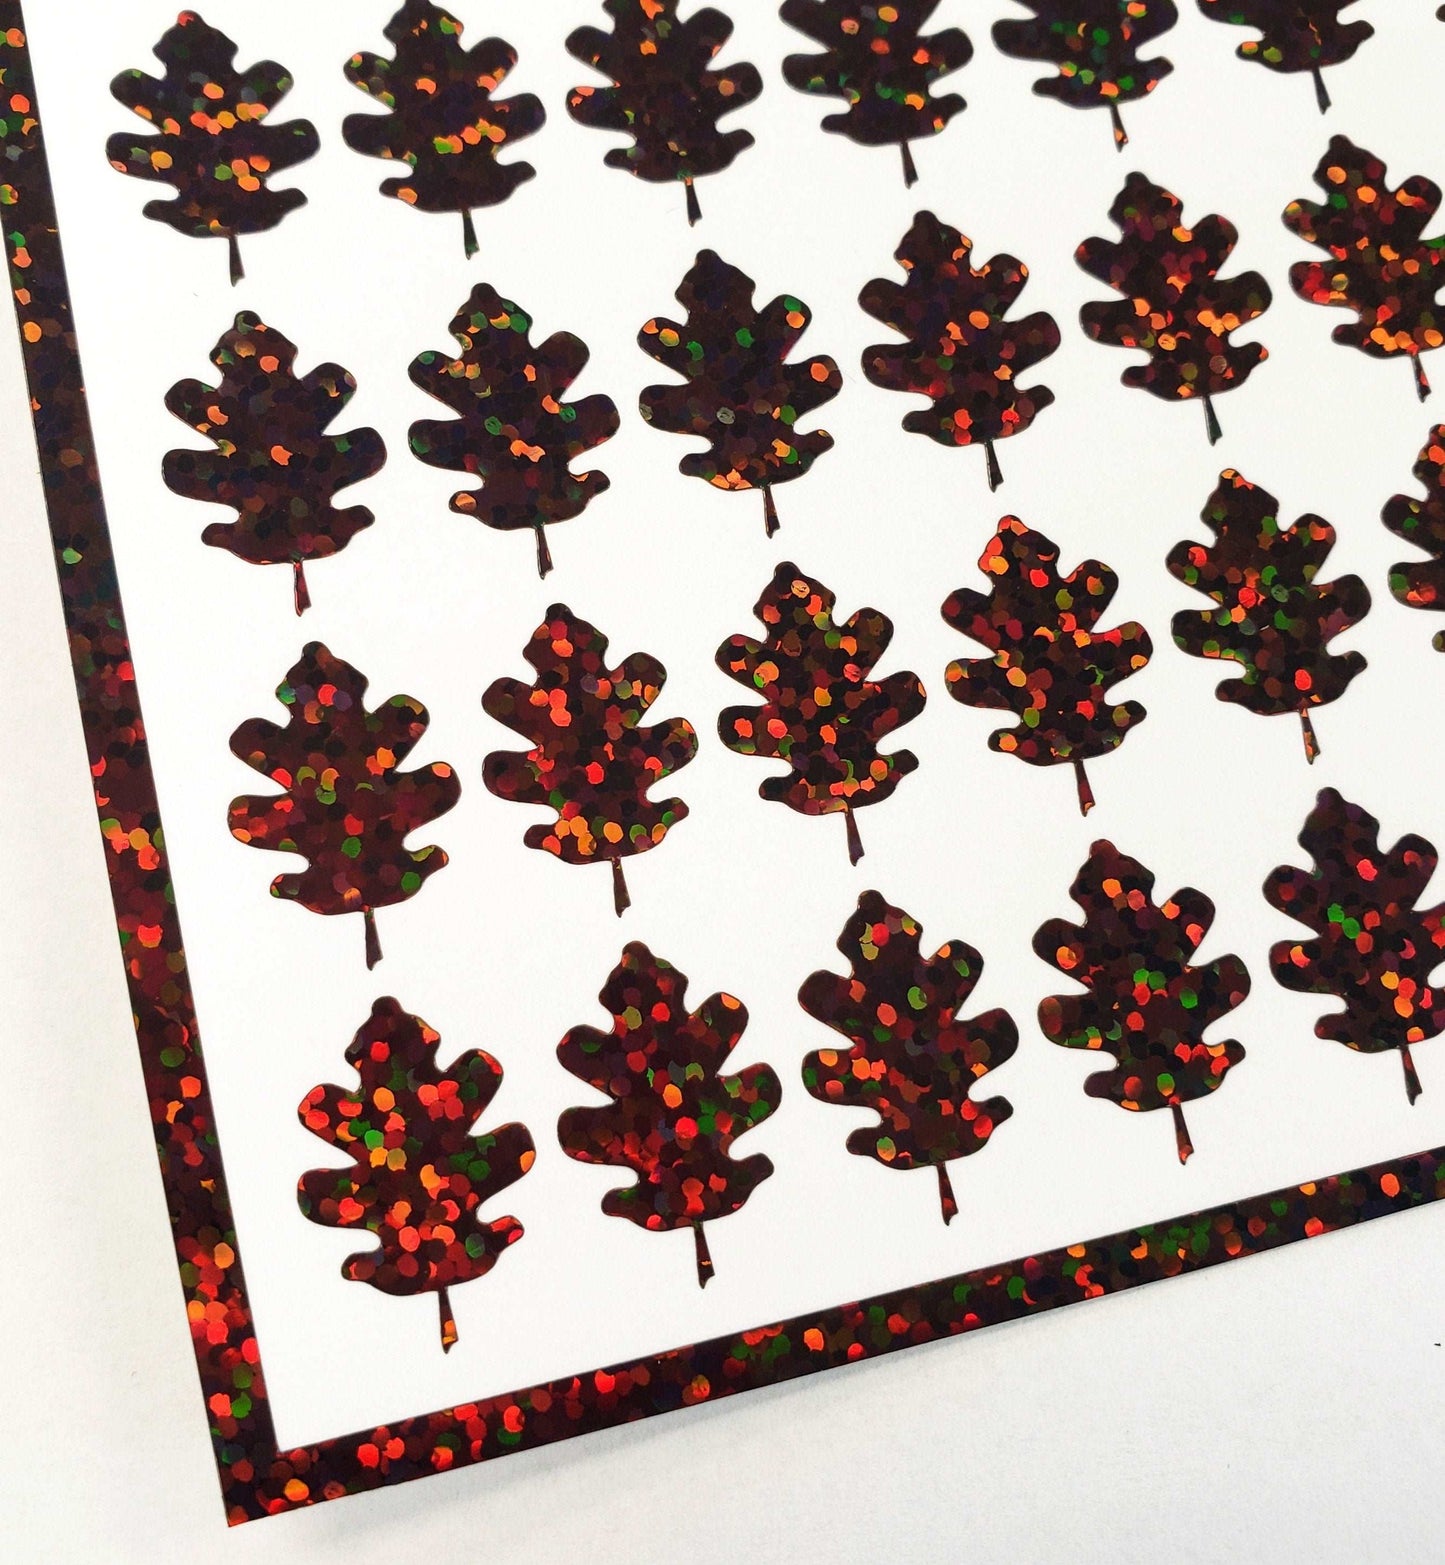 Brown Oak Leaves Sticker Sheet, set of 60 vinyl decals for Autumn weddings, daily journals, scrapbook pages and fall craft projects.